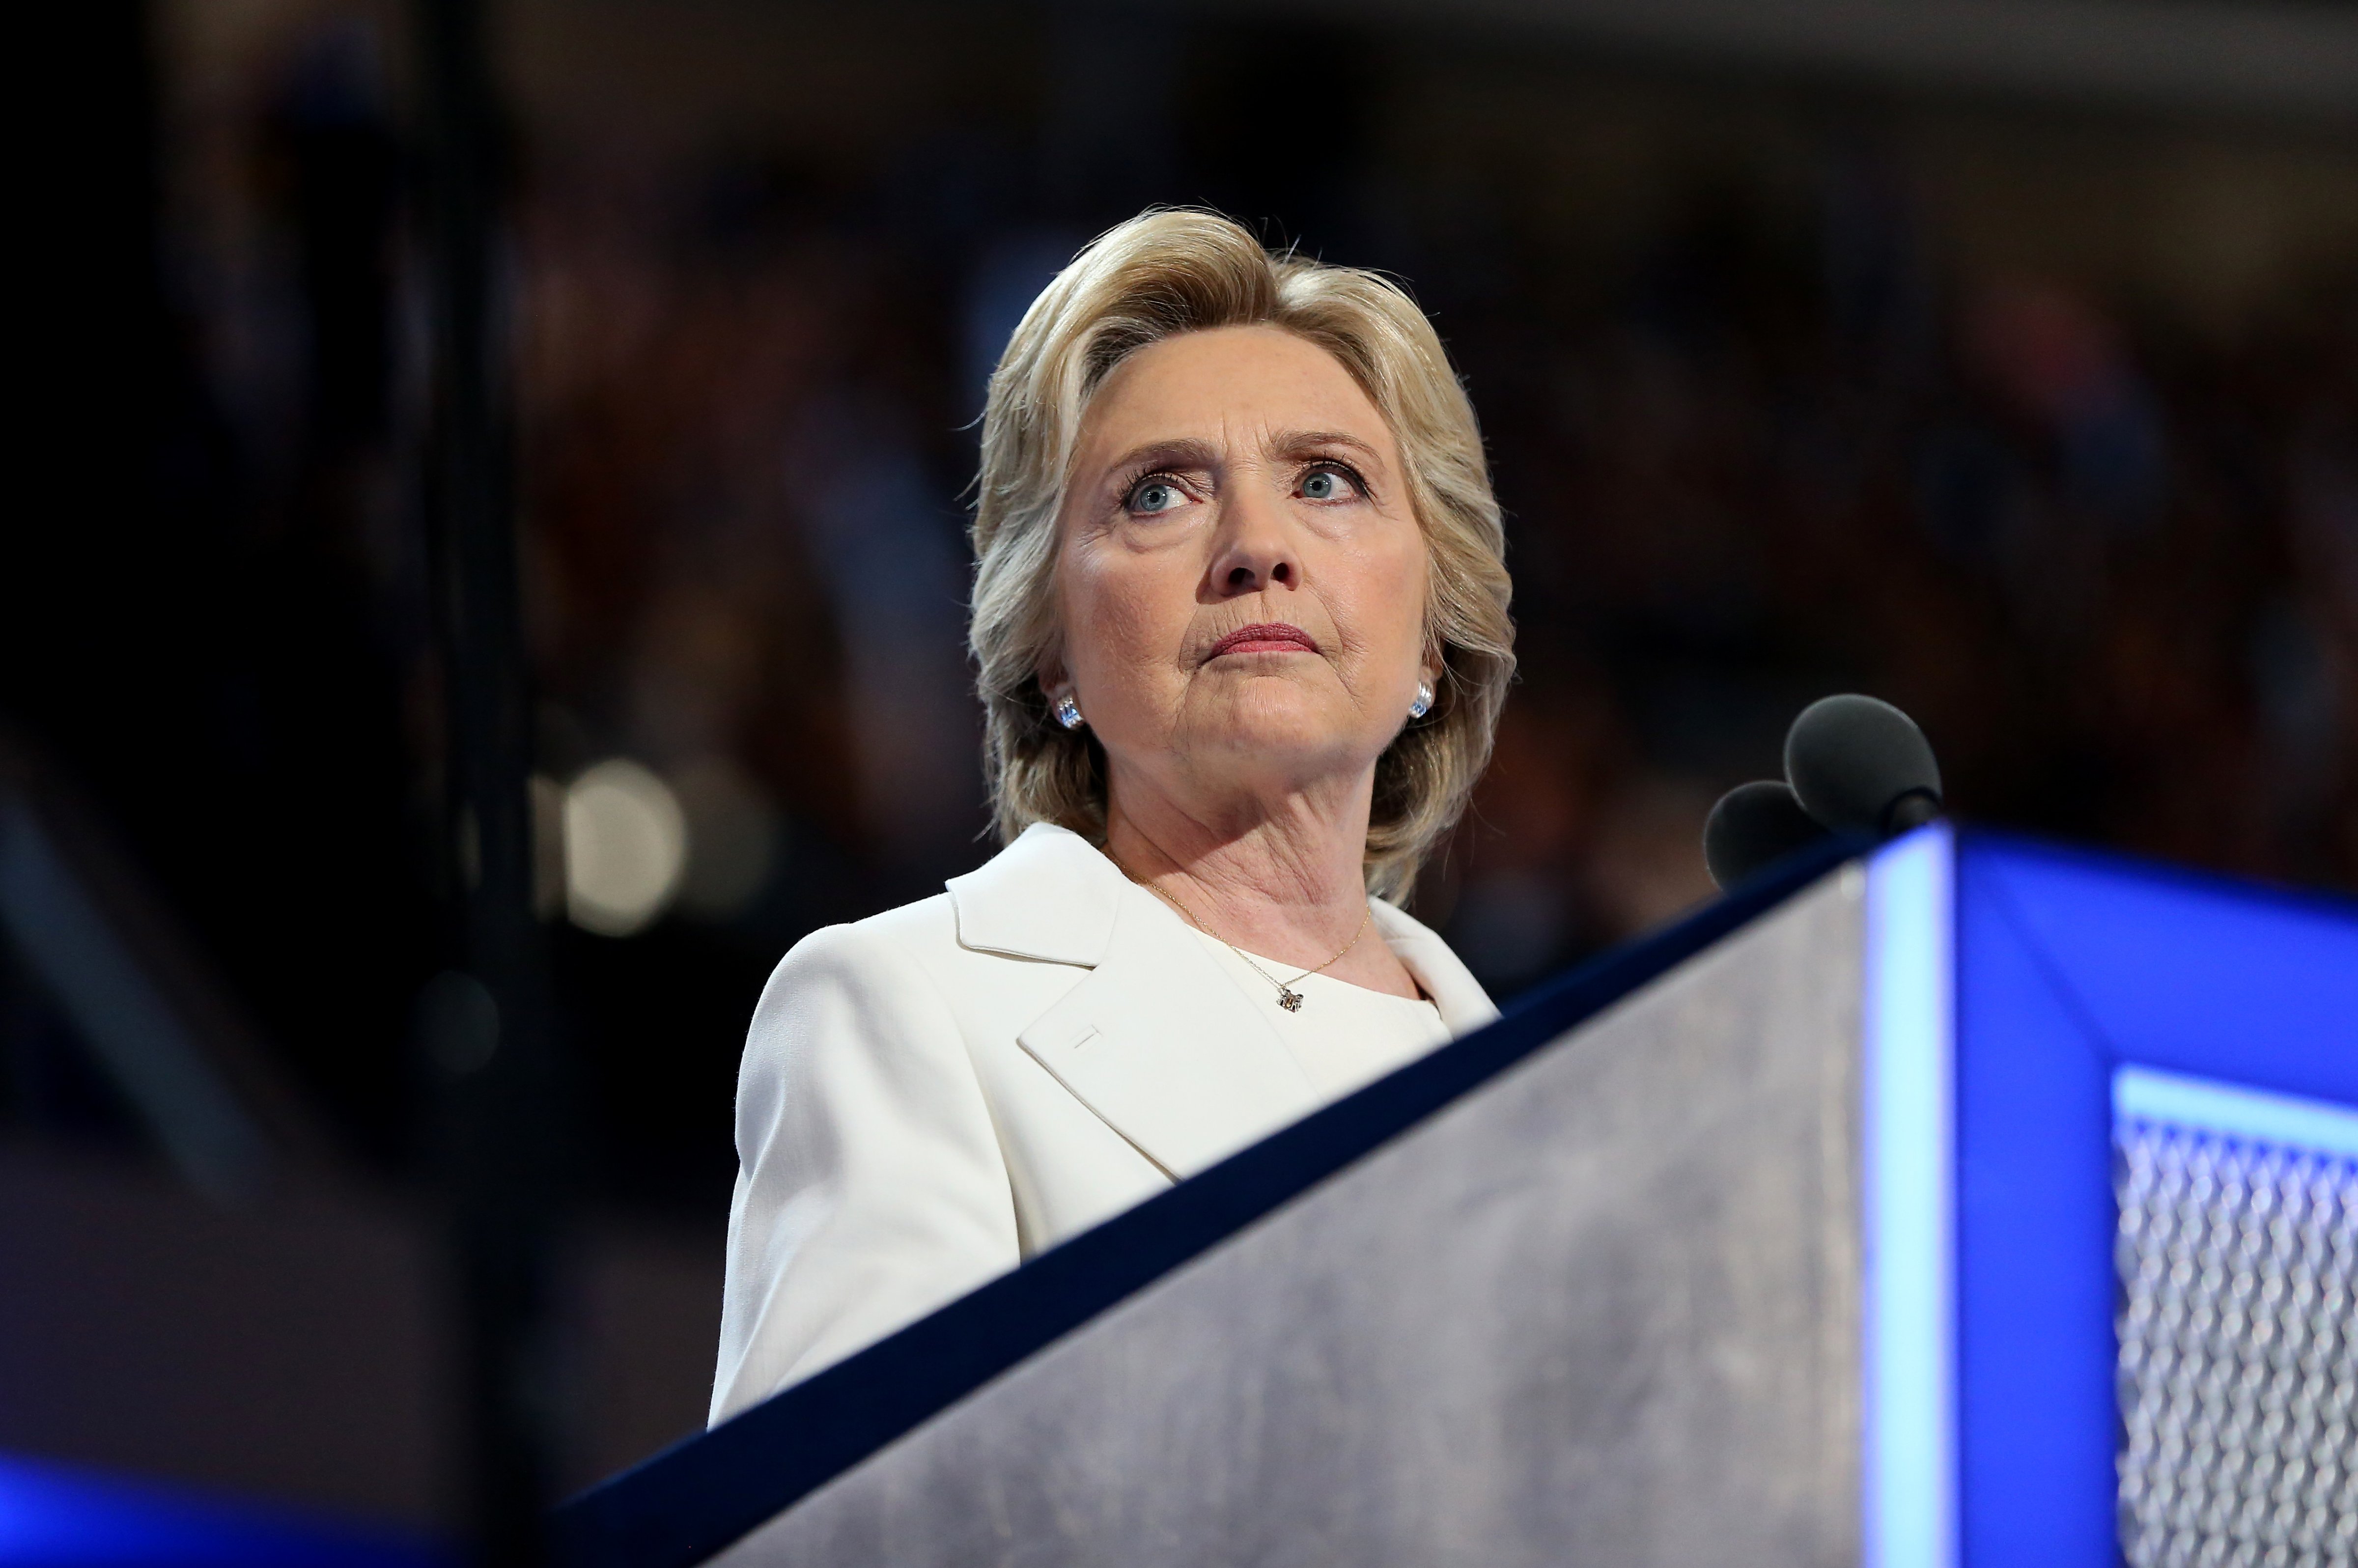 Hillary Clinton, 2016 Democratic presidential nominee, pauses during her speech at the Democratic National Convention on  July 28, 2016. (Bloomberg/Getty Images)